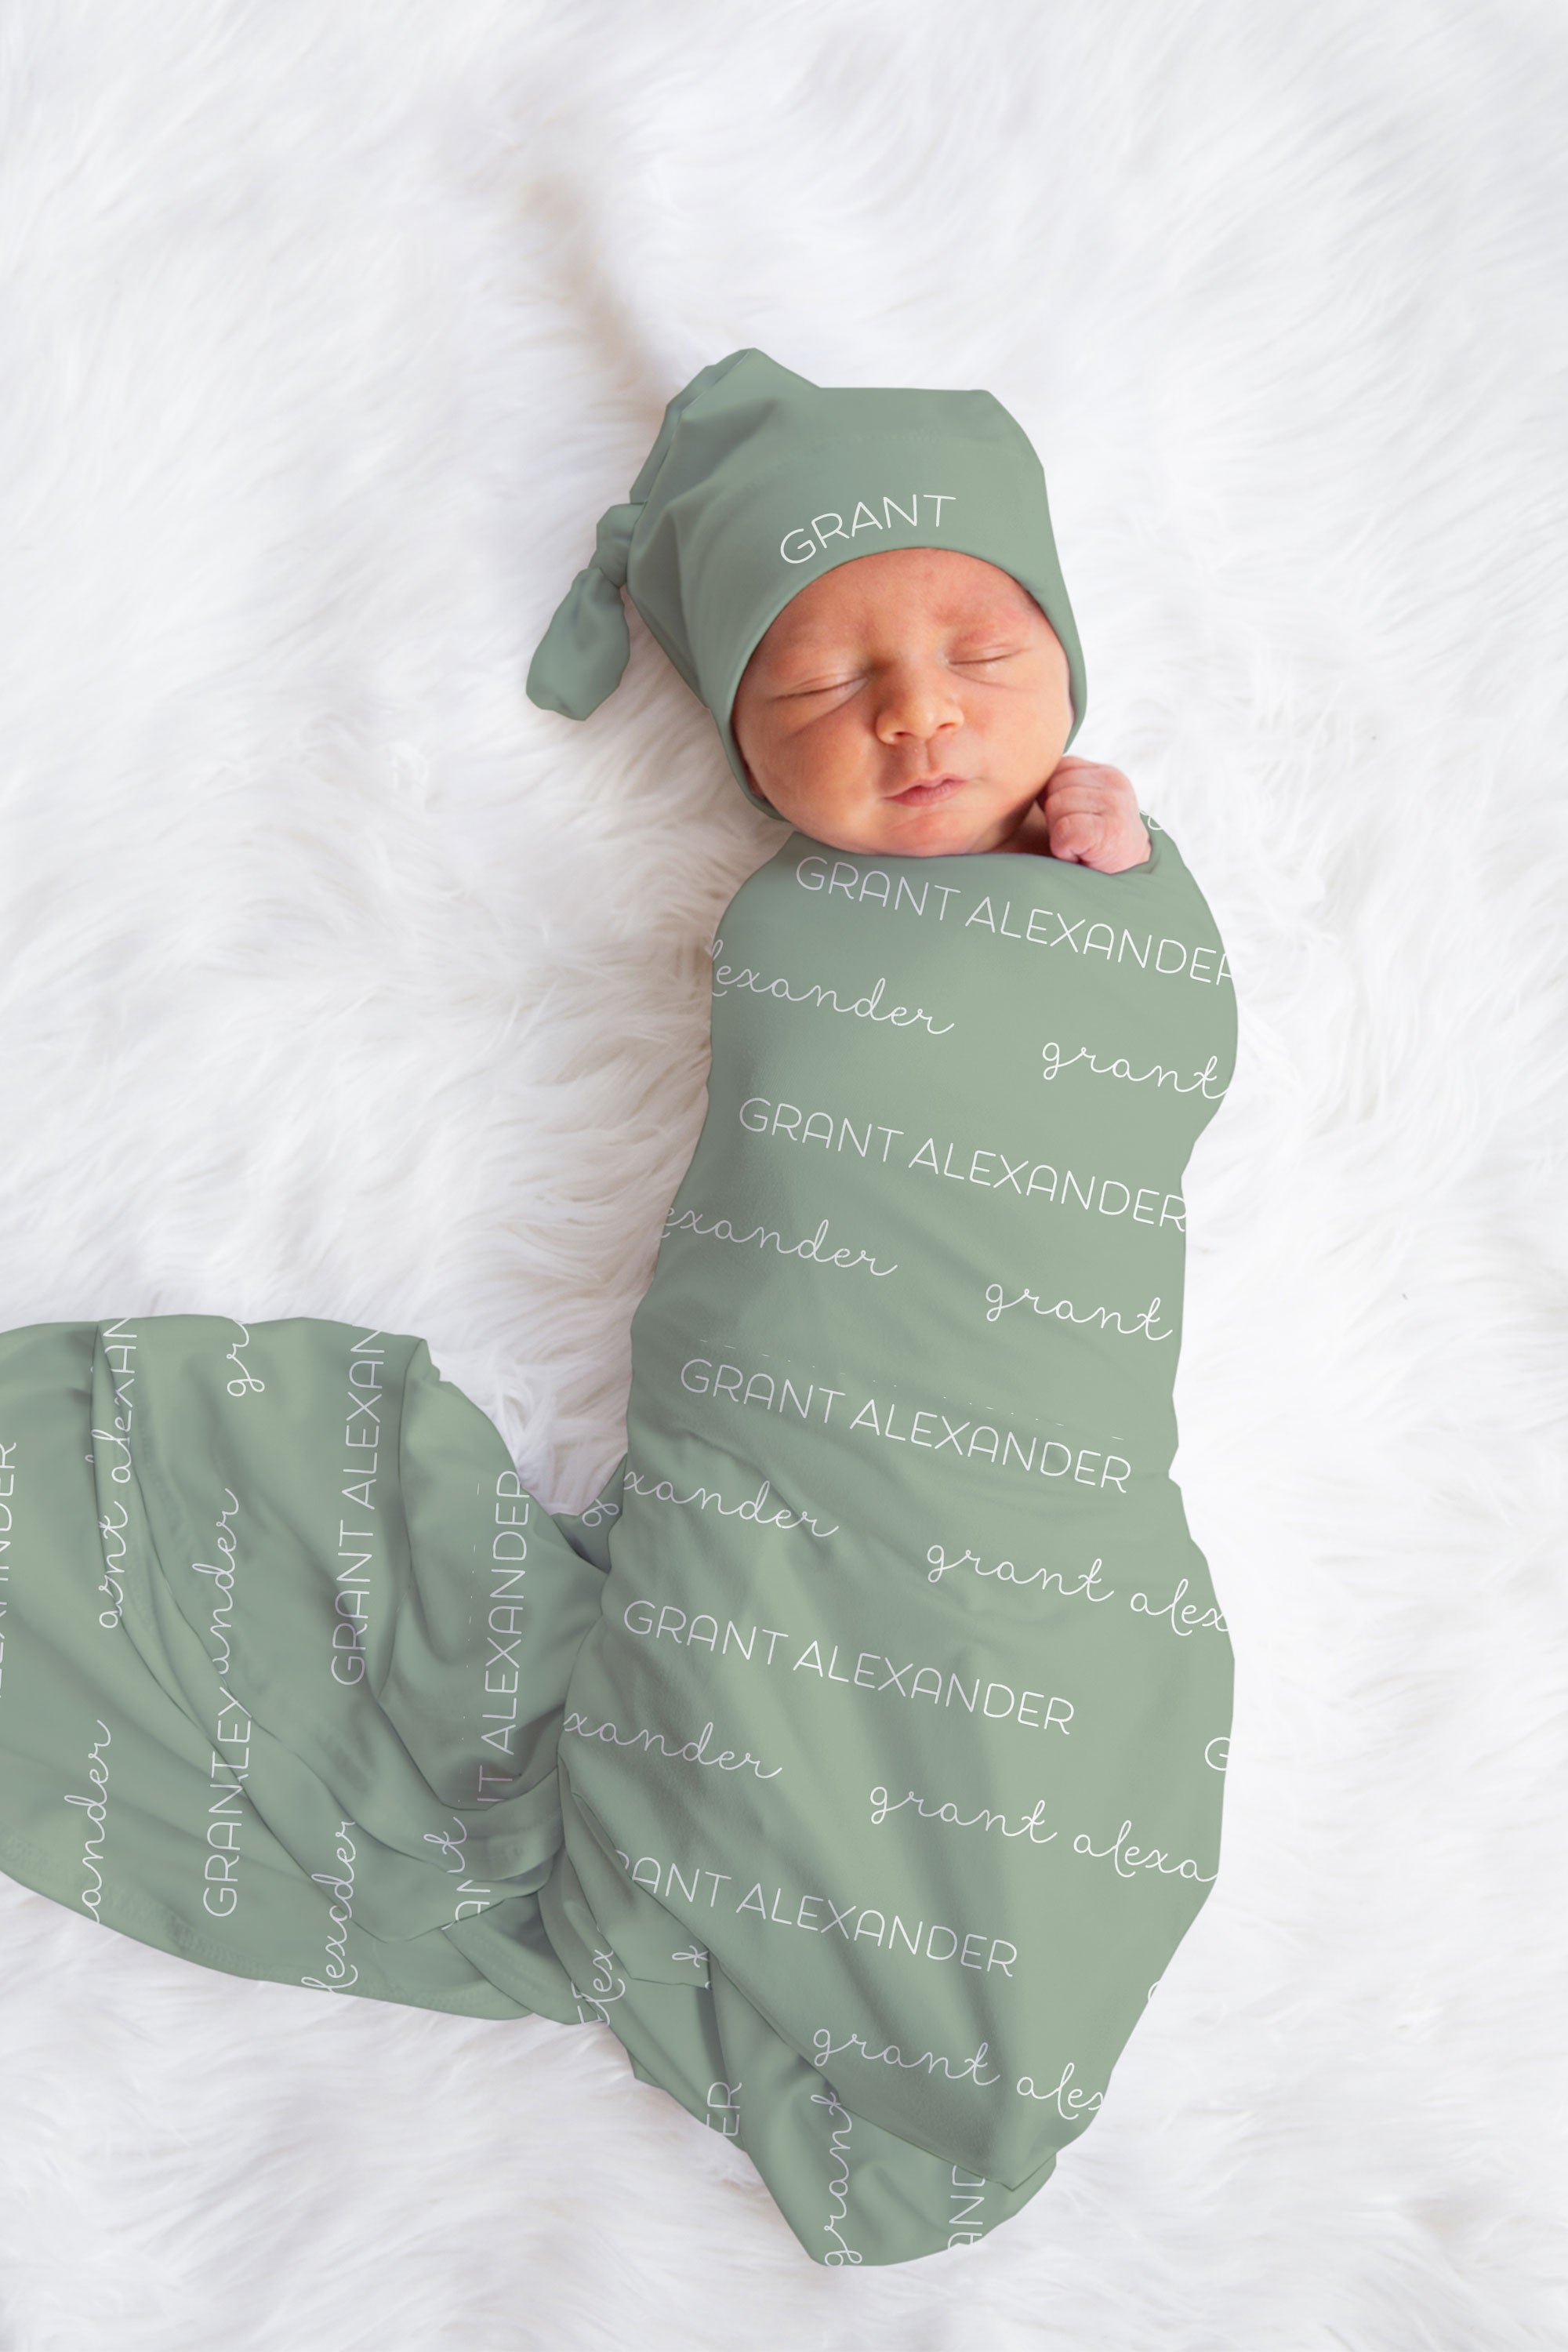 Baby name swaddle blanket set with hat and headband options, super soft stretchy jersey knit fabric